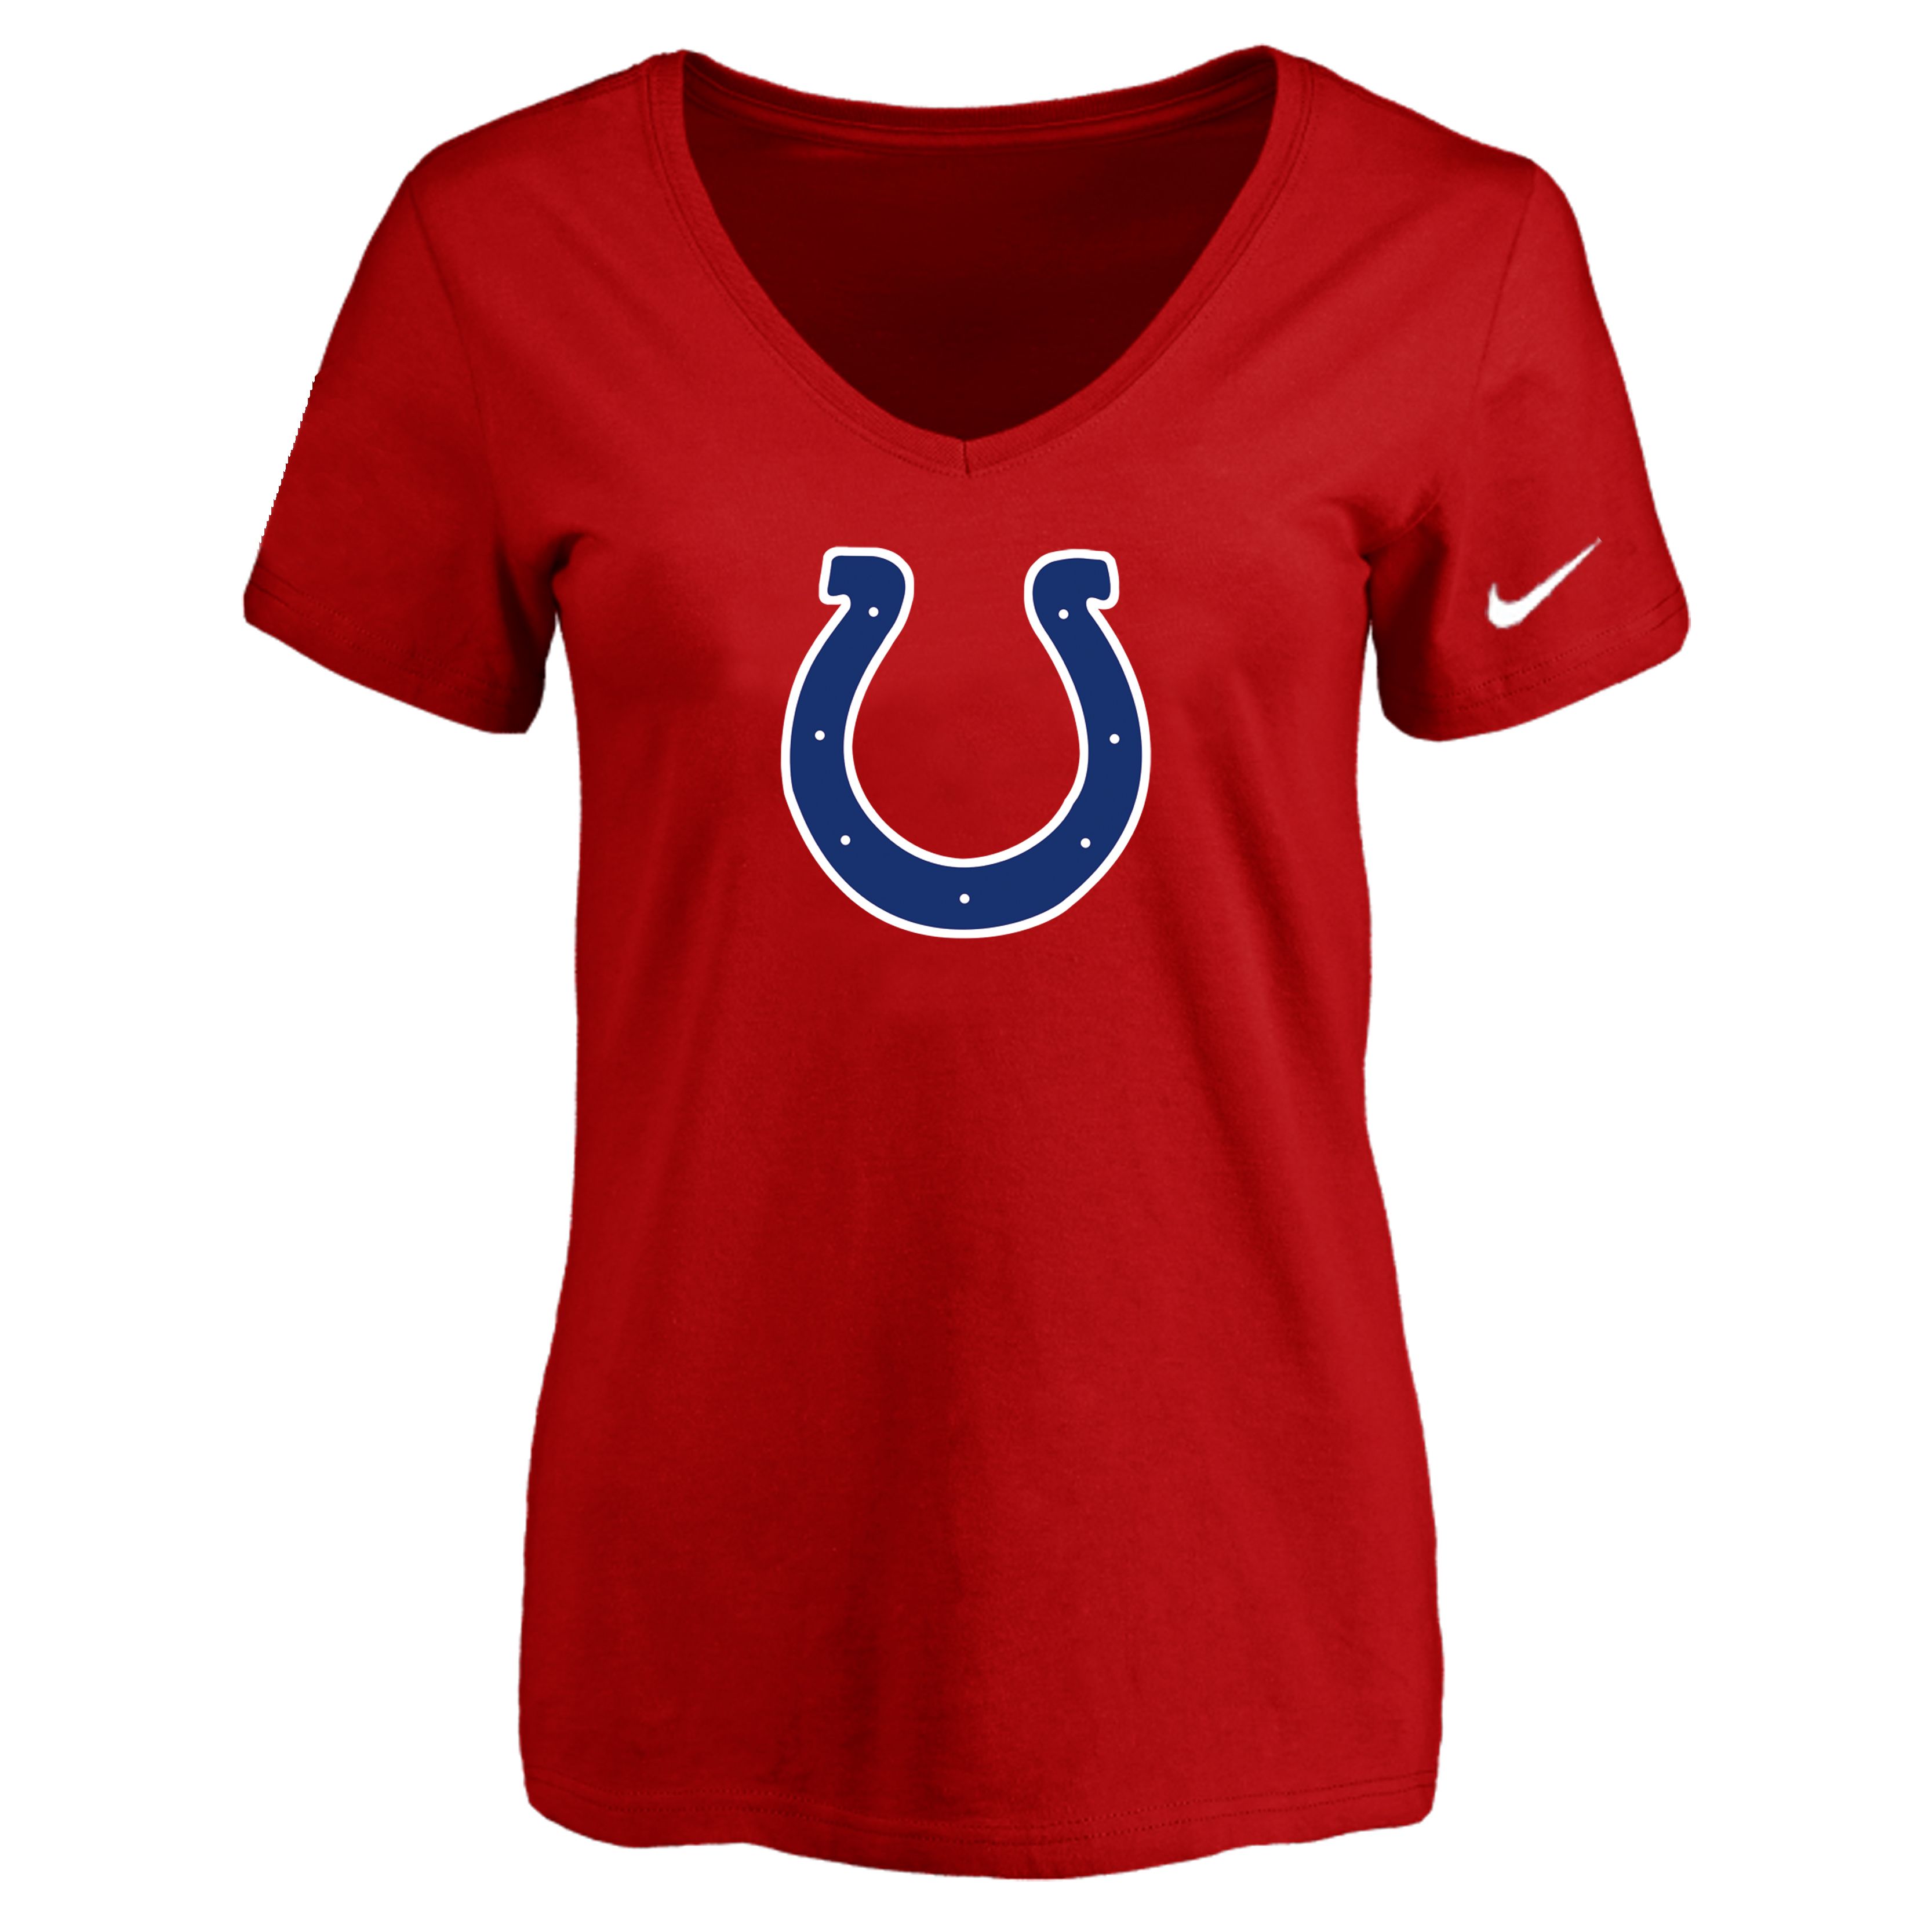 Indiannapolis Colts Red Women's Logo V neck T-Shirt